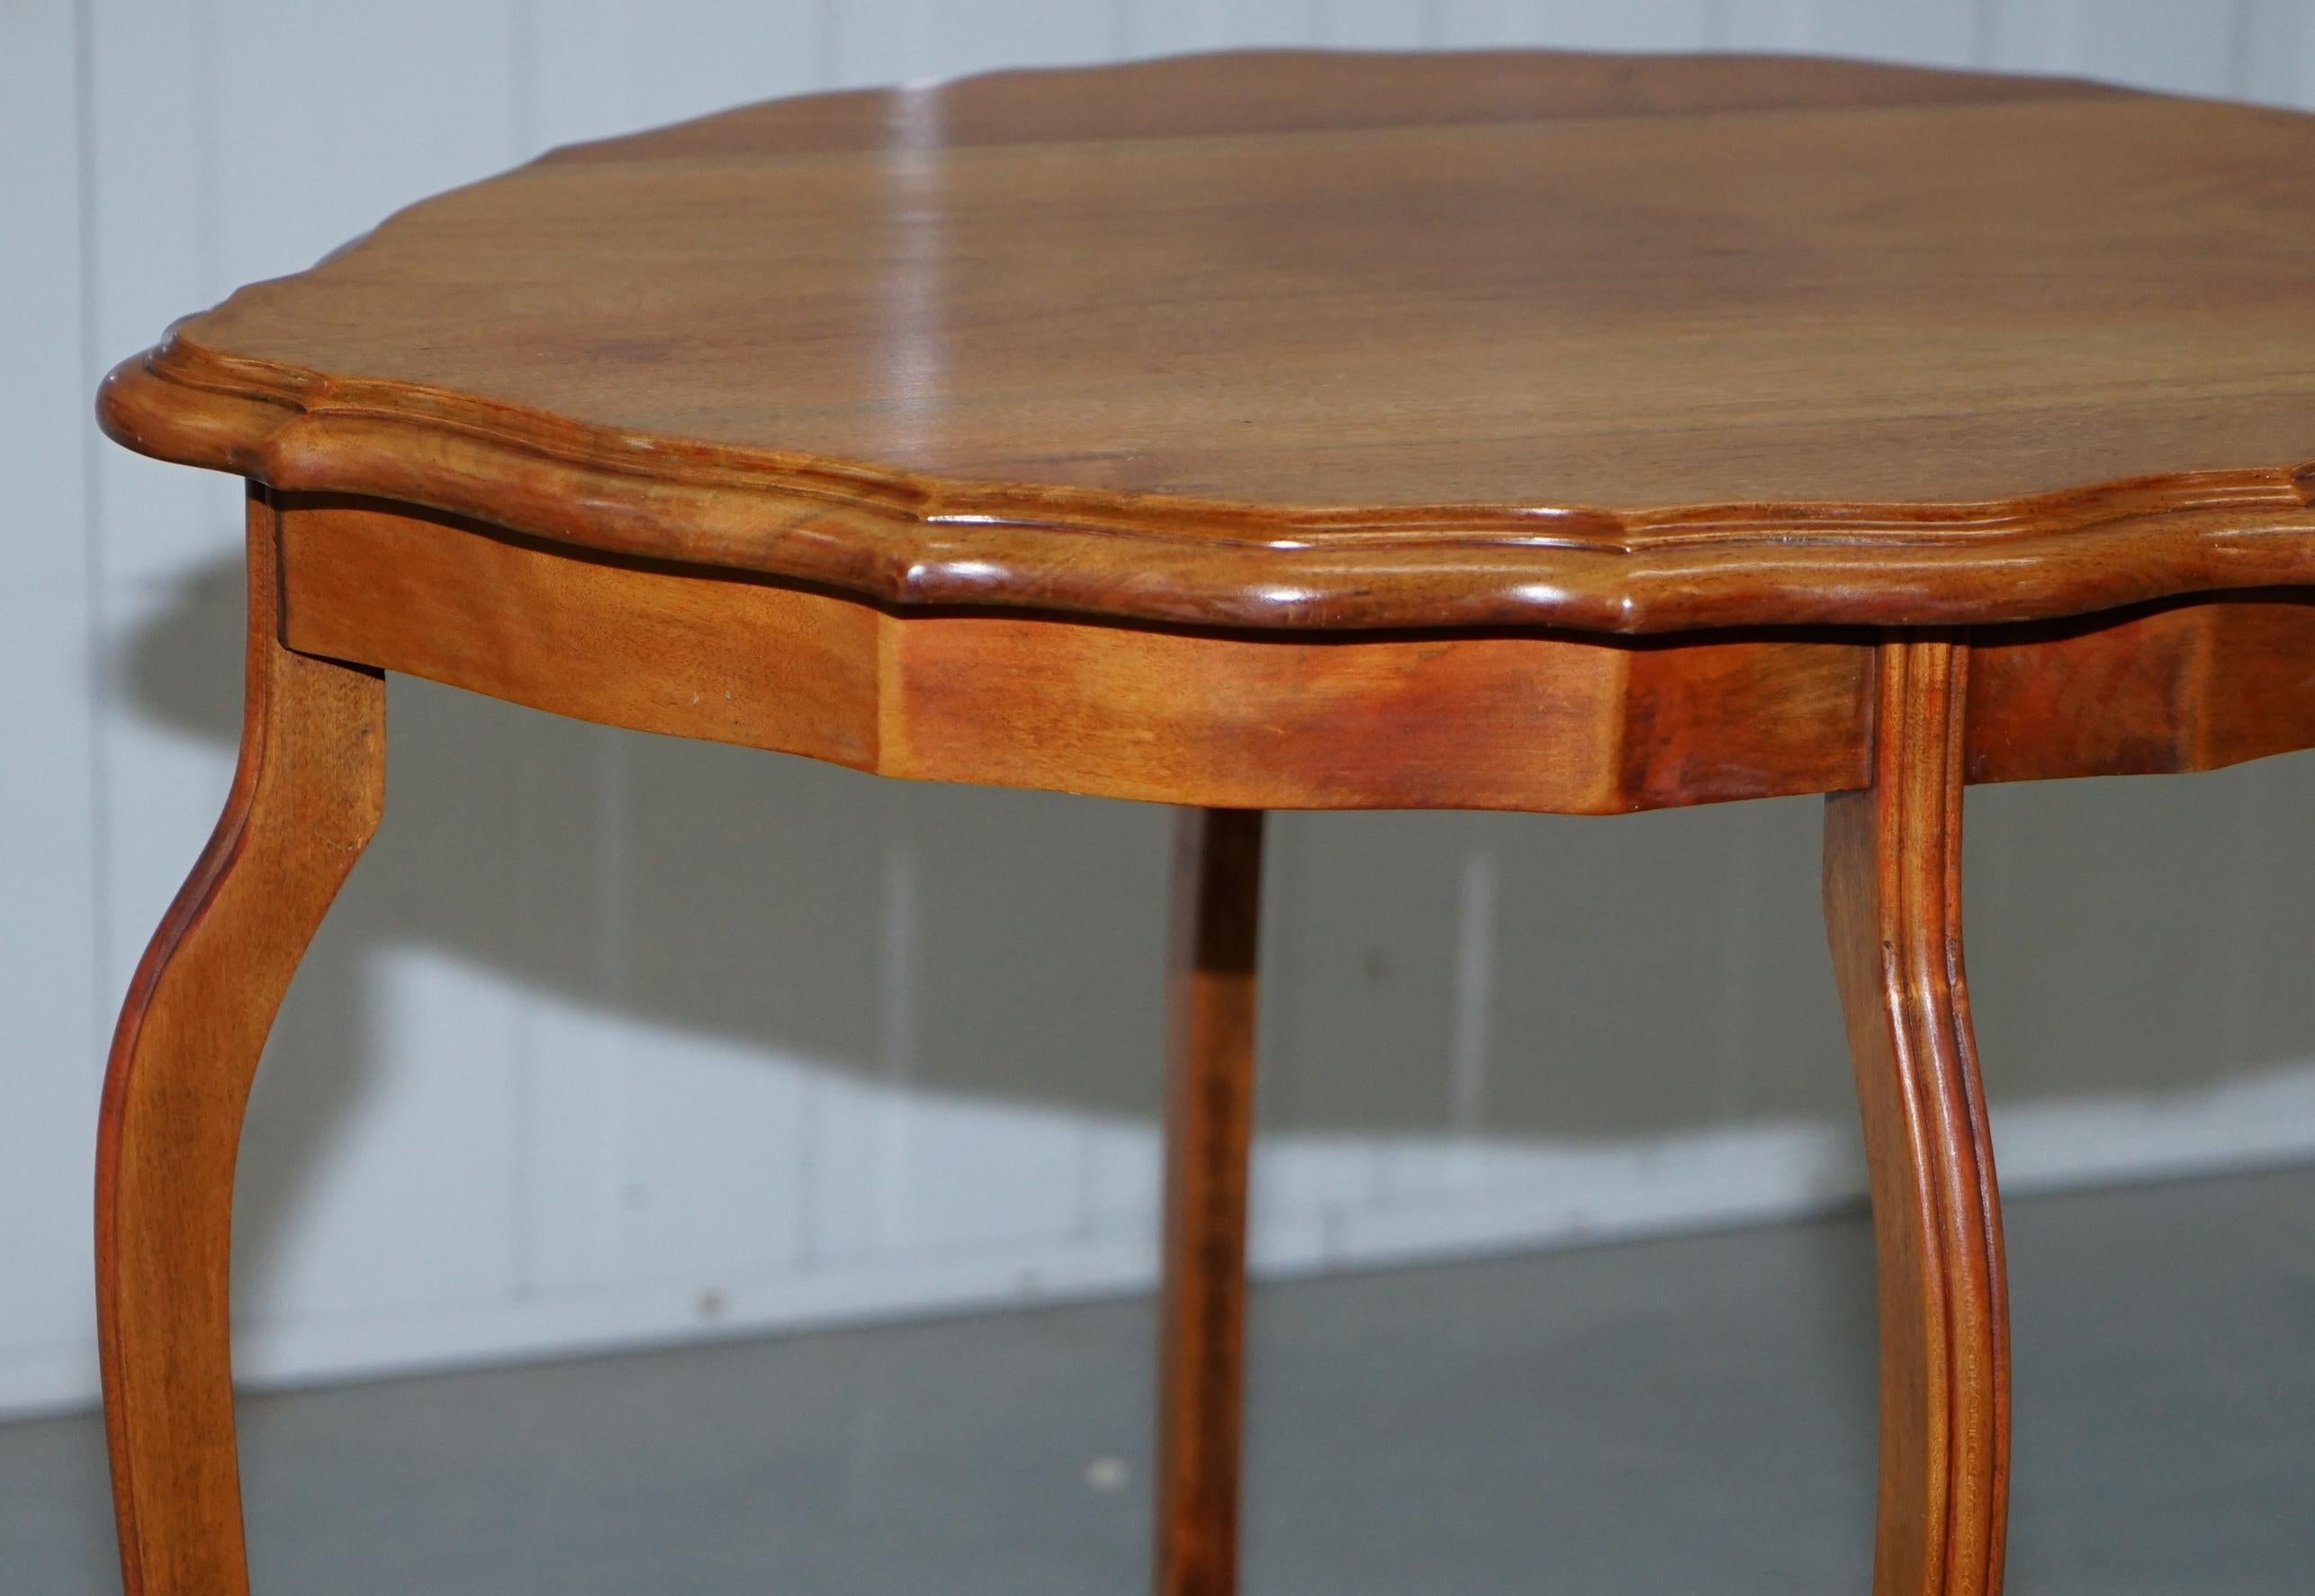 Lovely Decorative Satinwood Occasional Centre Table Scalloped Edge Ornate Legs For Sale 1